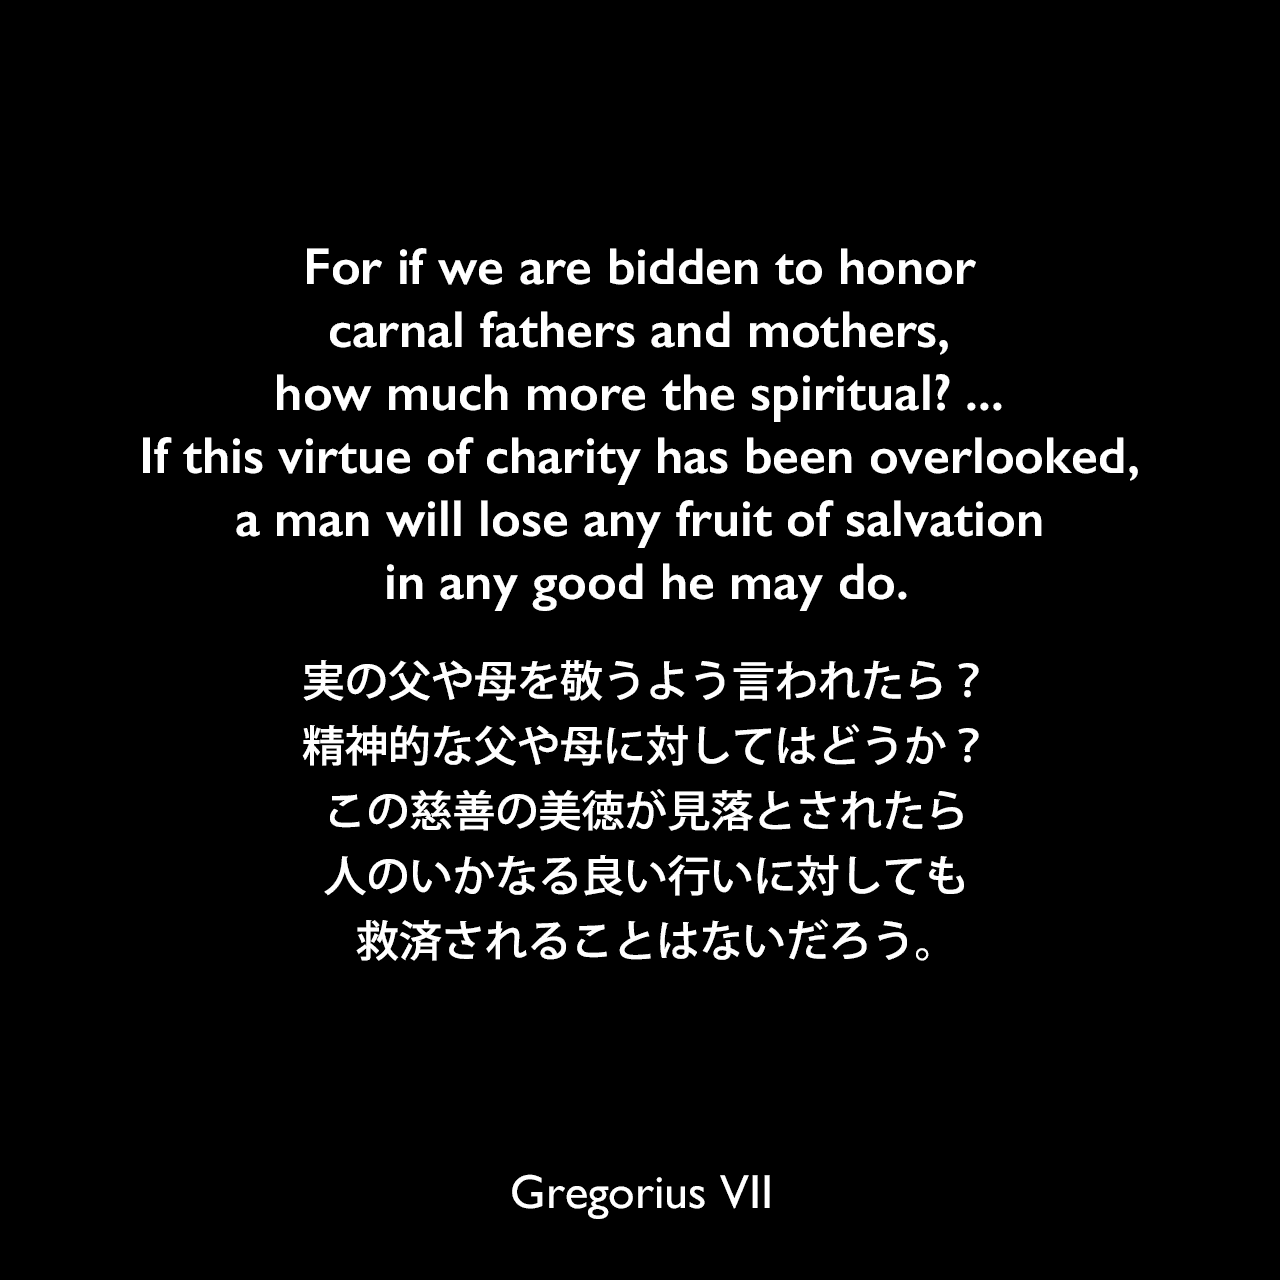 For if we are bidden to honor carnal fathers and mothers, how much more the spiritual? ... If this virtue of charity has been overlooked, a man will lose any fruit of salvation in any good he may do.実の父や母を敬うよう言われたら？精神的な父や母に対してはどうか？この慈善の美徳が見落とされたら、人のいかなる良い行いに対しても救済されることはないだろう。Gregorius VII